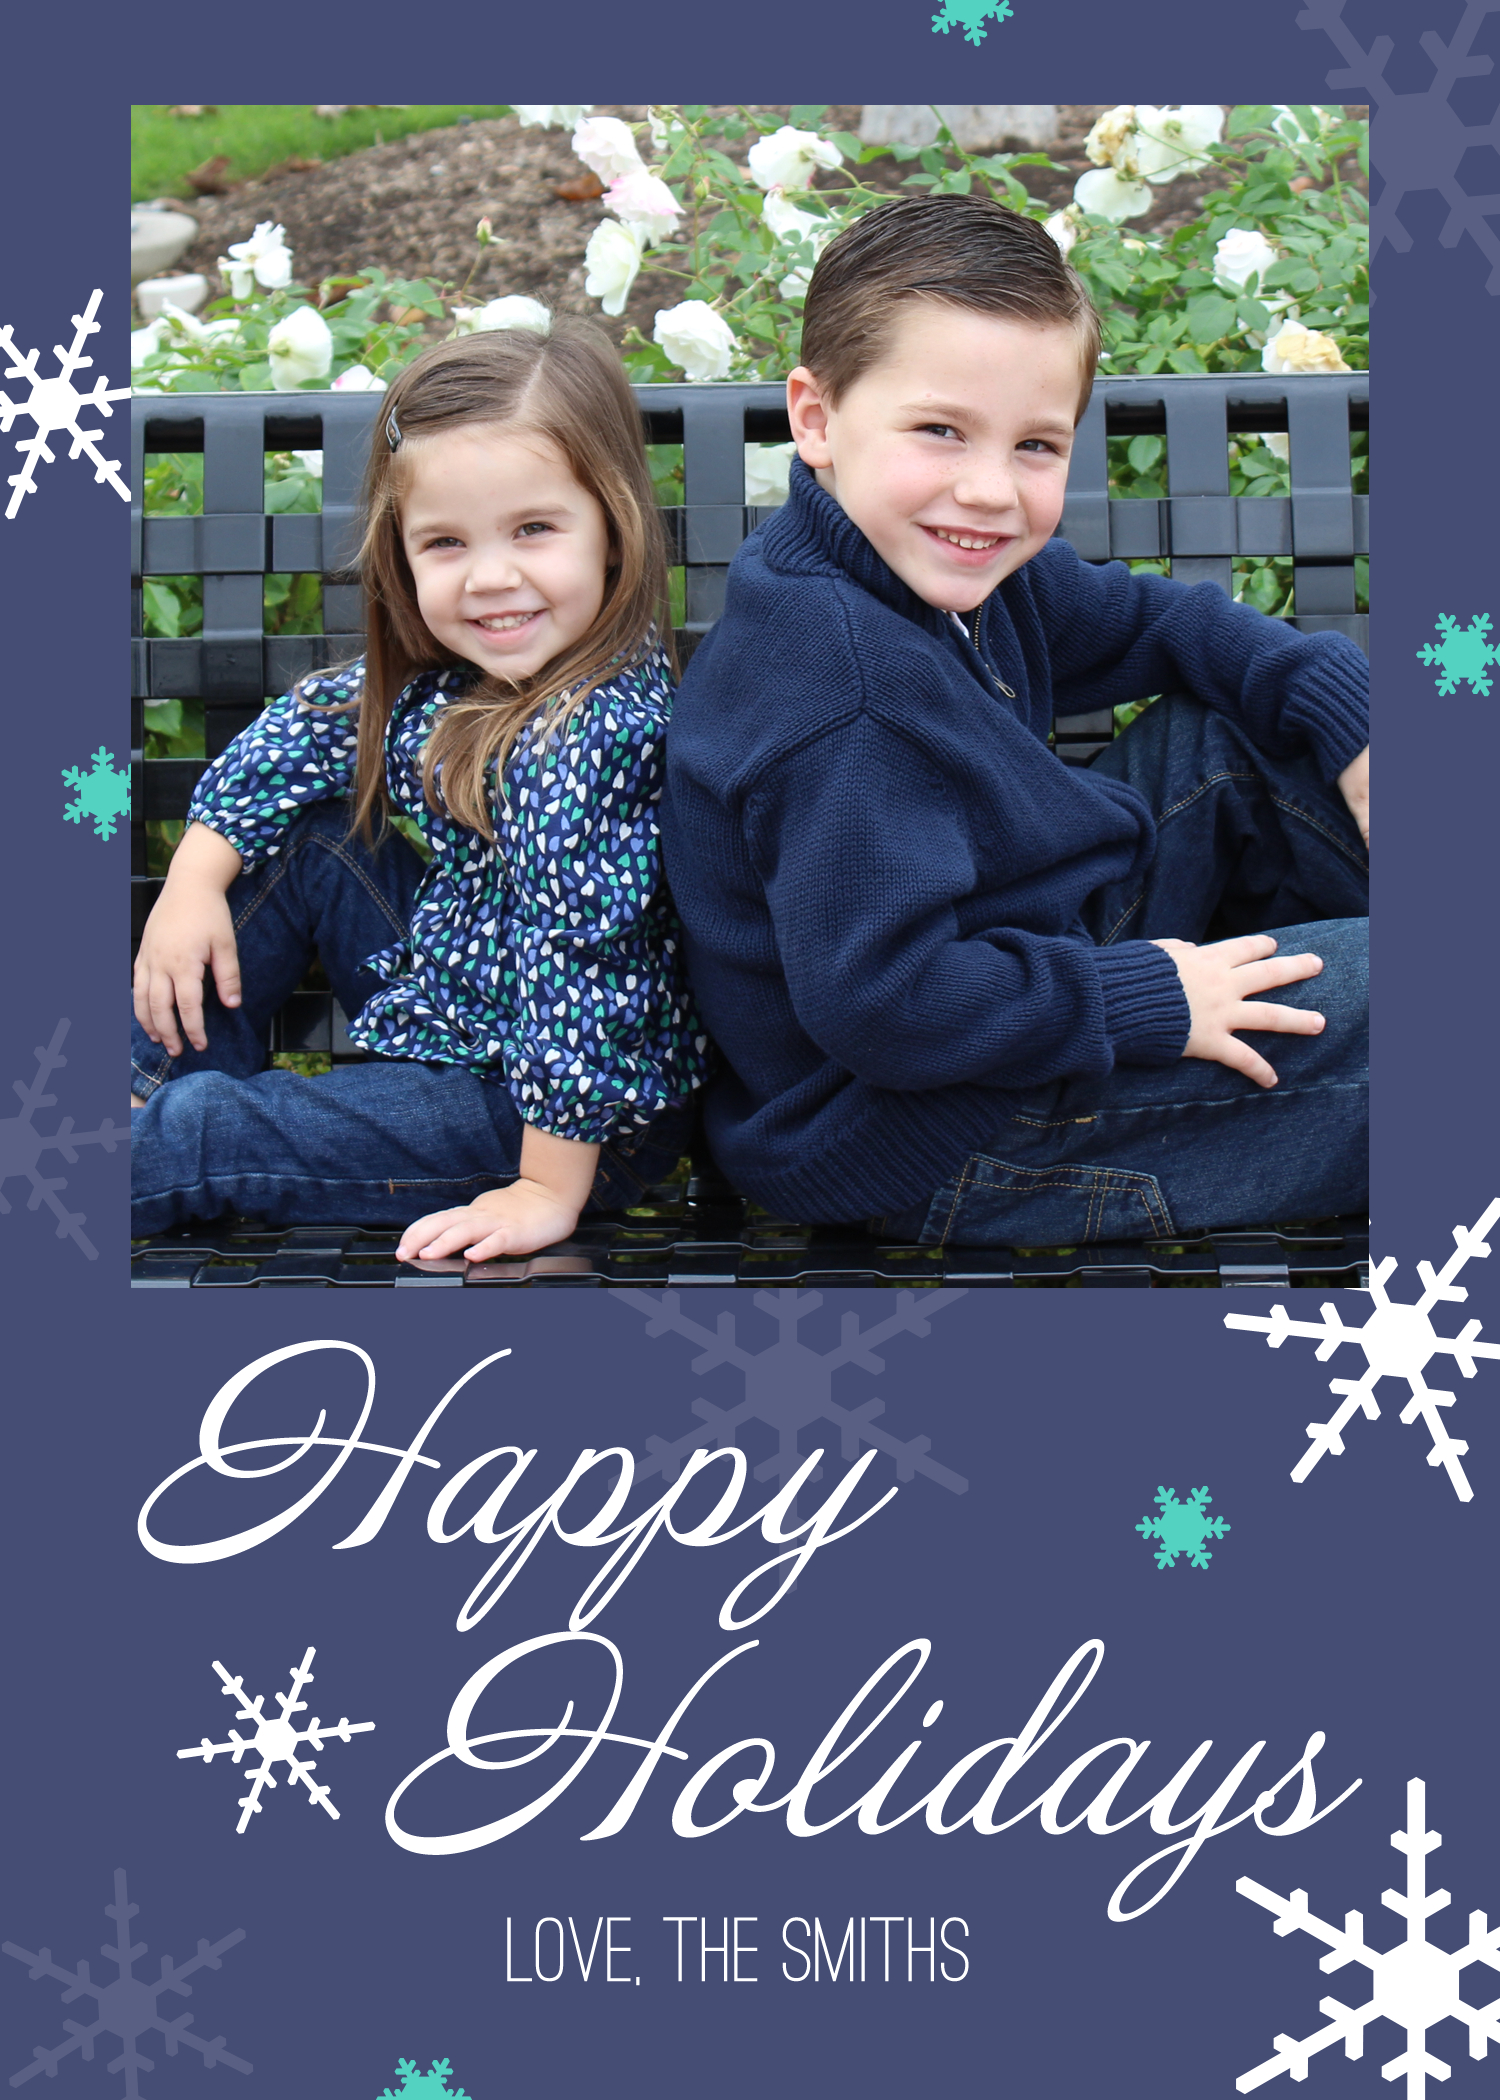 Holiday Photo Card & Pixlr Video Tutorial – Designer Blogs For Free Holiday Photo Card Templates